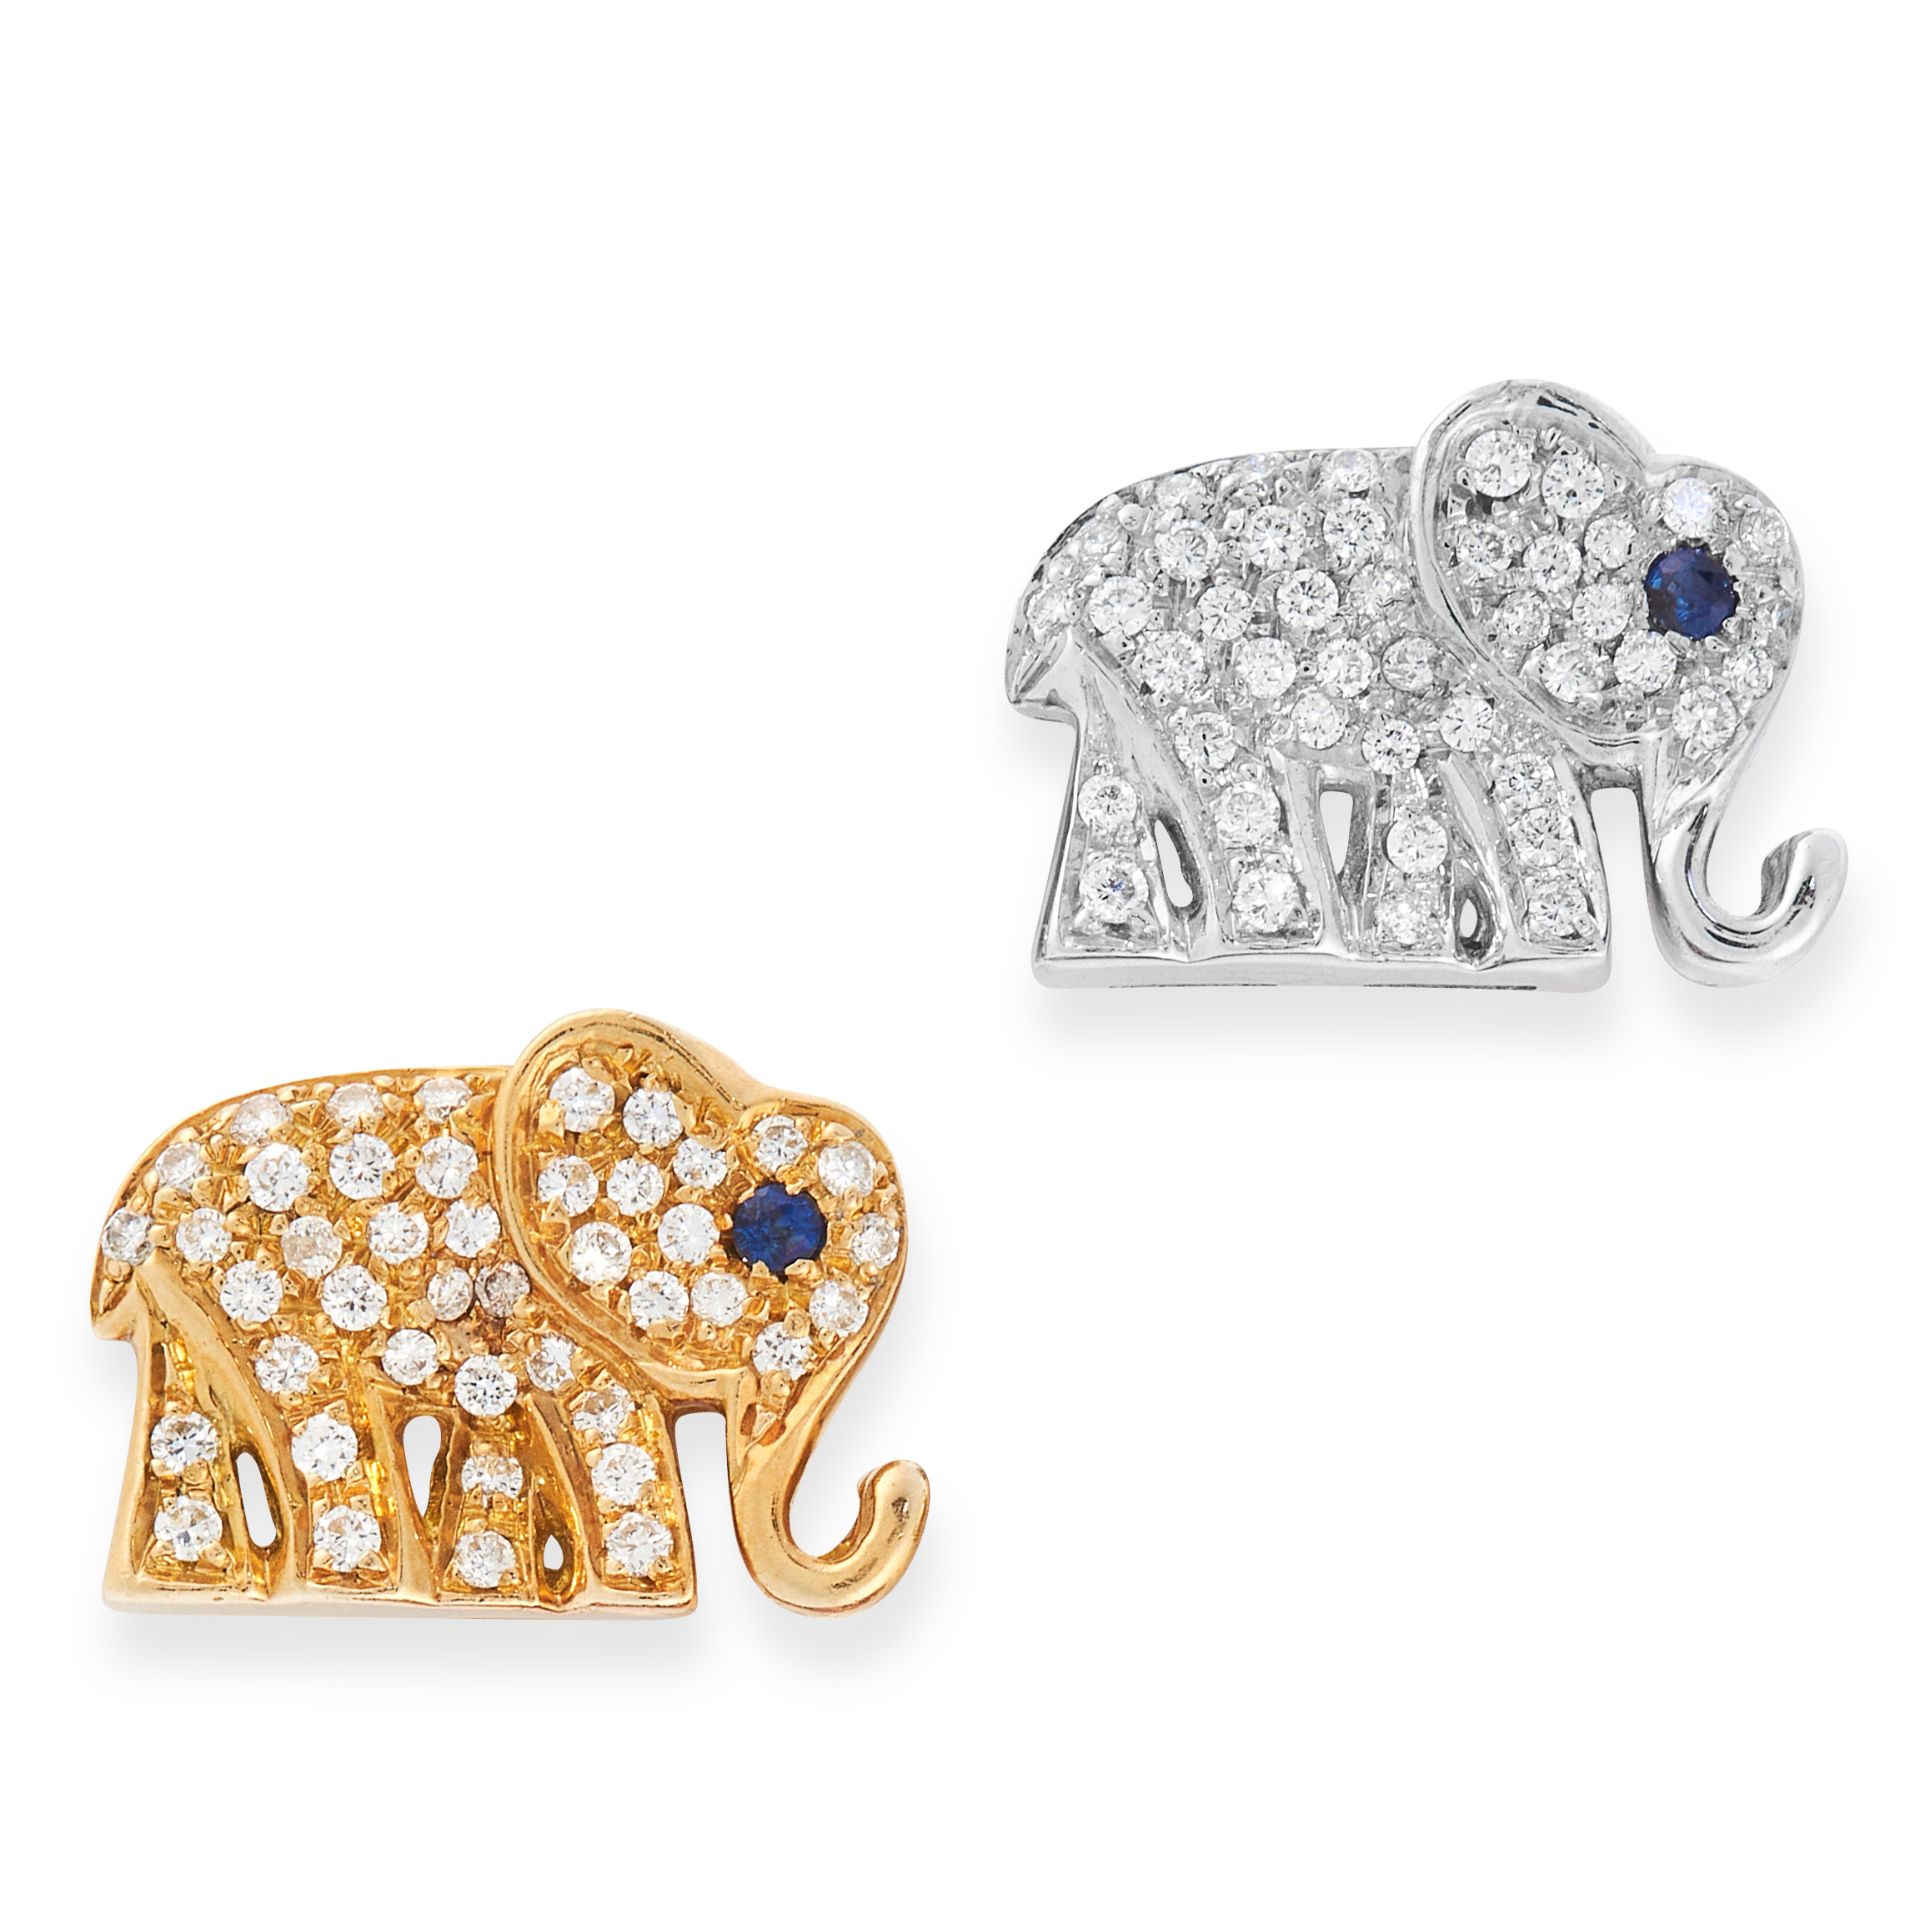 A PAIR OF SAPPHIRE AND DIAMOND ELEPHANT STUD EARRINGS in yellow and white gold, designed as